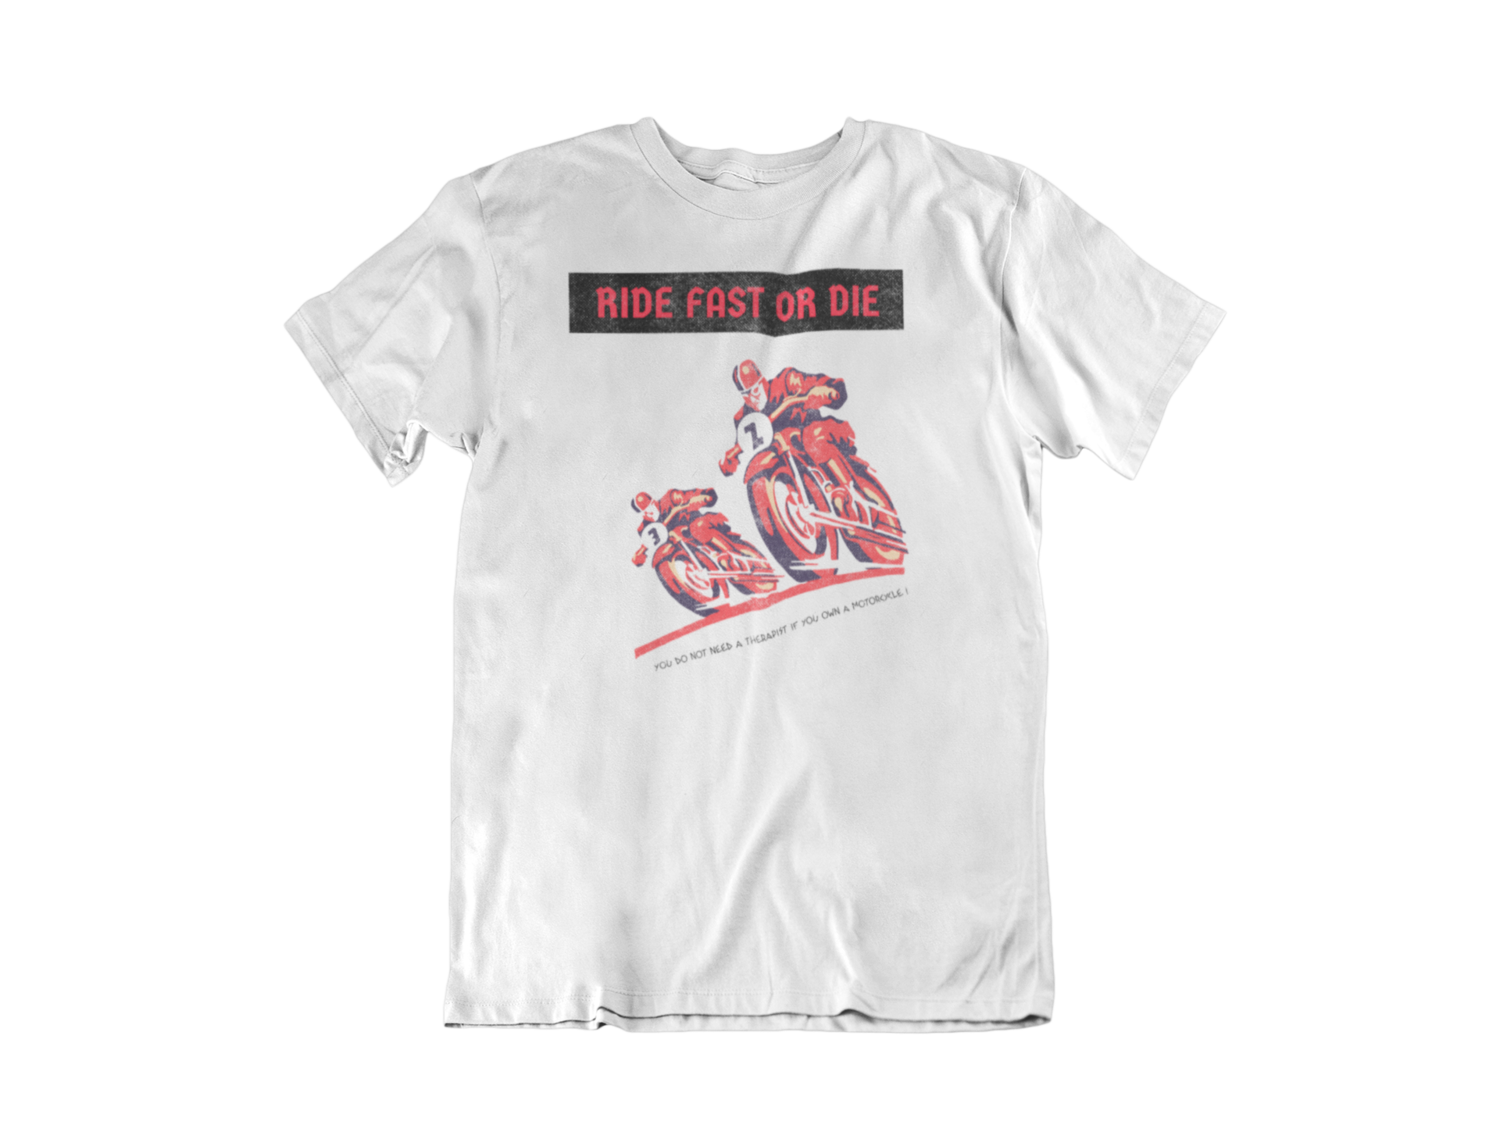 RIDE FAST OR DIE T-SHIRT FOR MEN